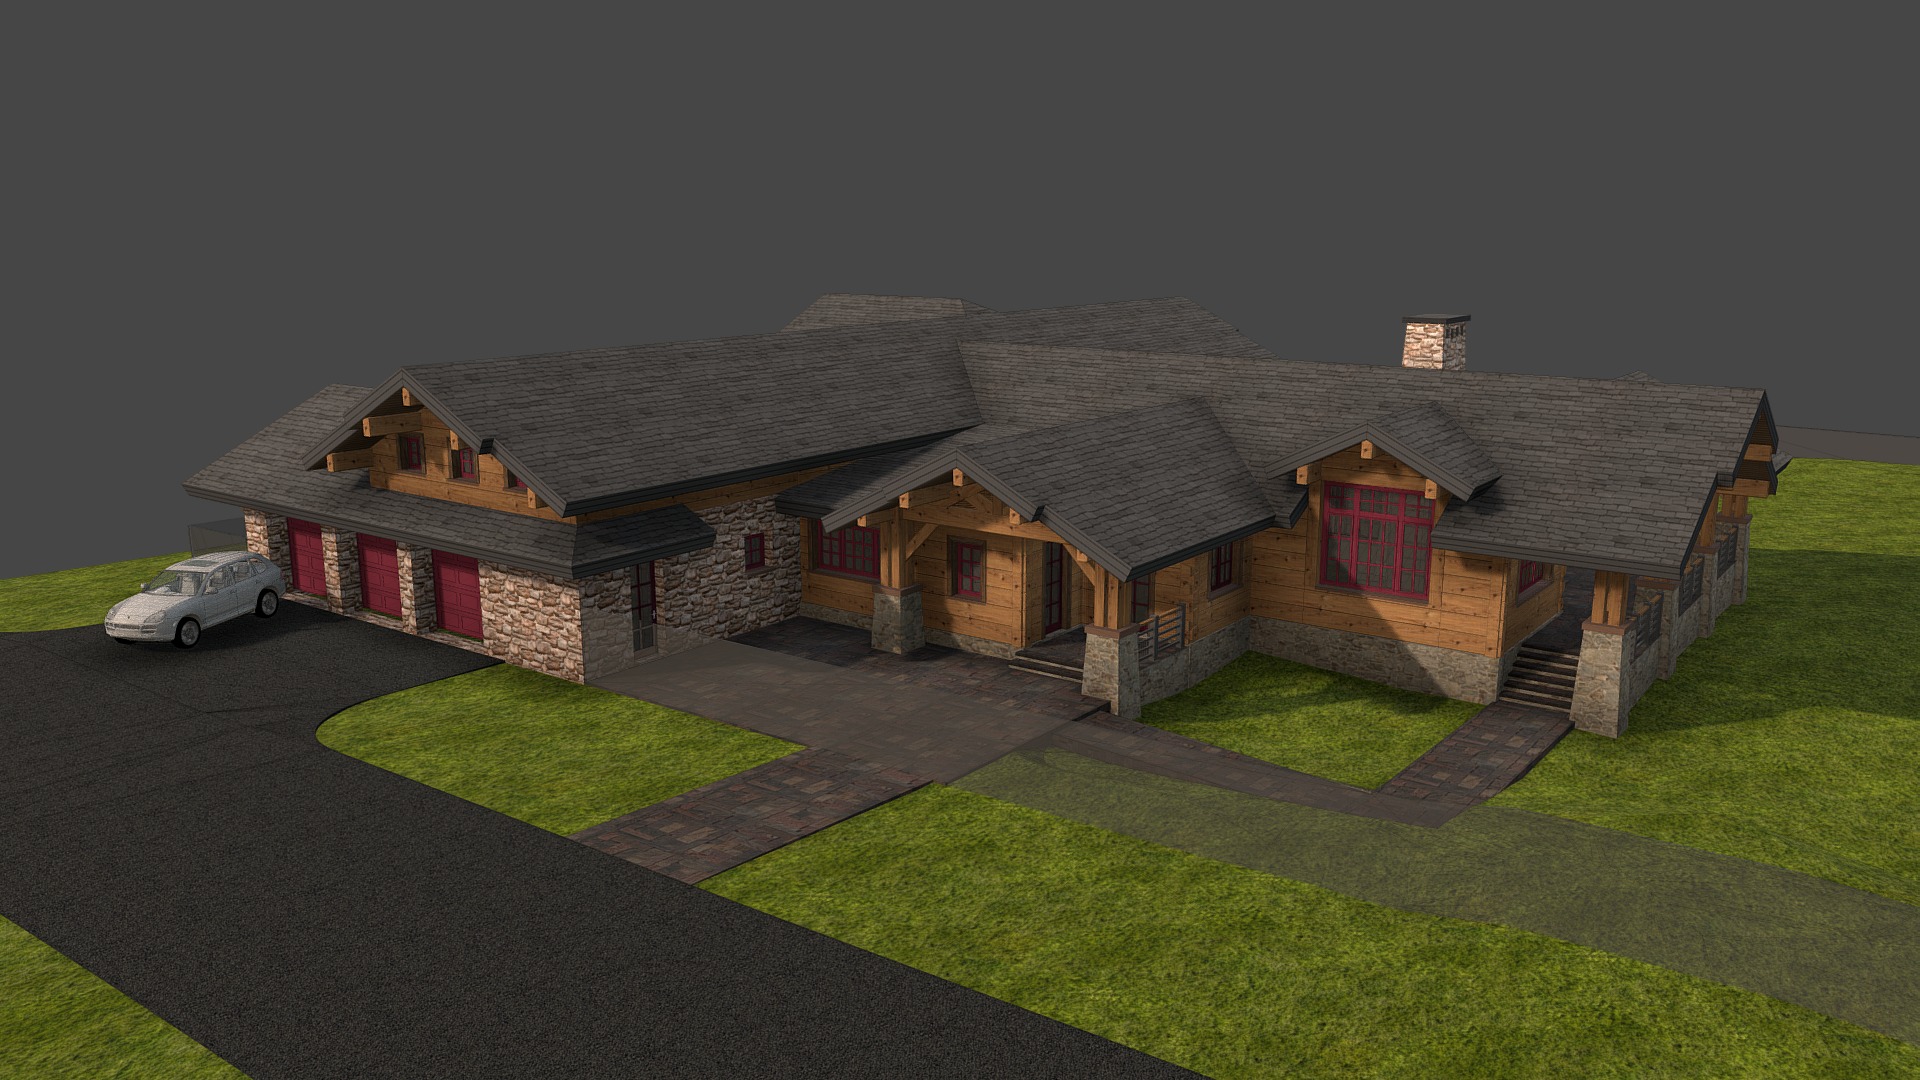 3D model Проект дома 7 - This is a 3D model of the Проект дома 7. The 3D model is about a house with a driveway.